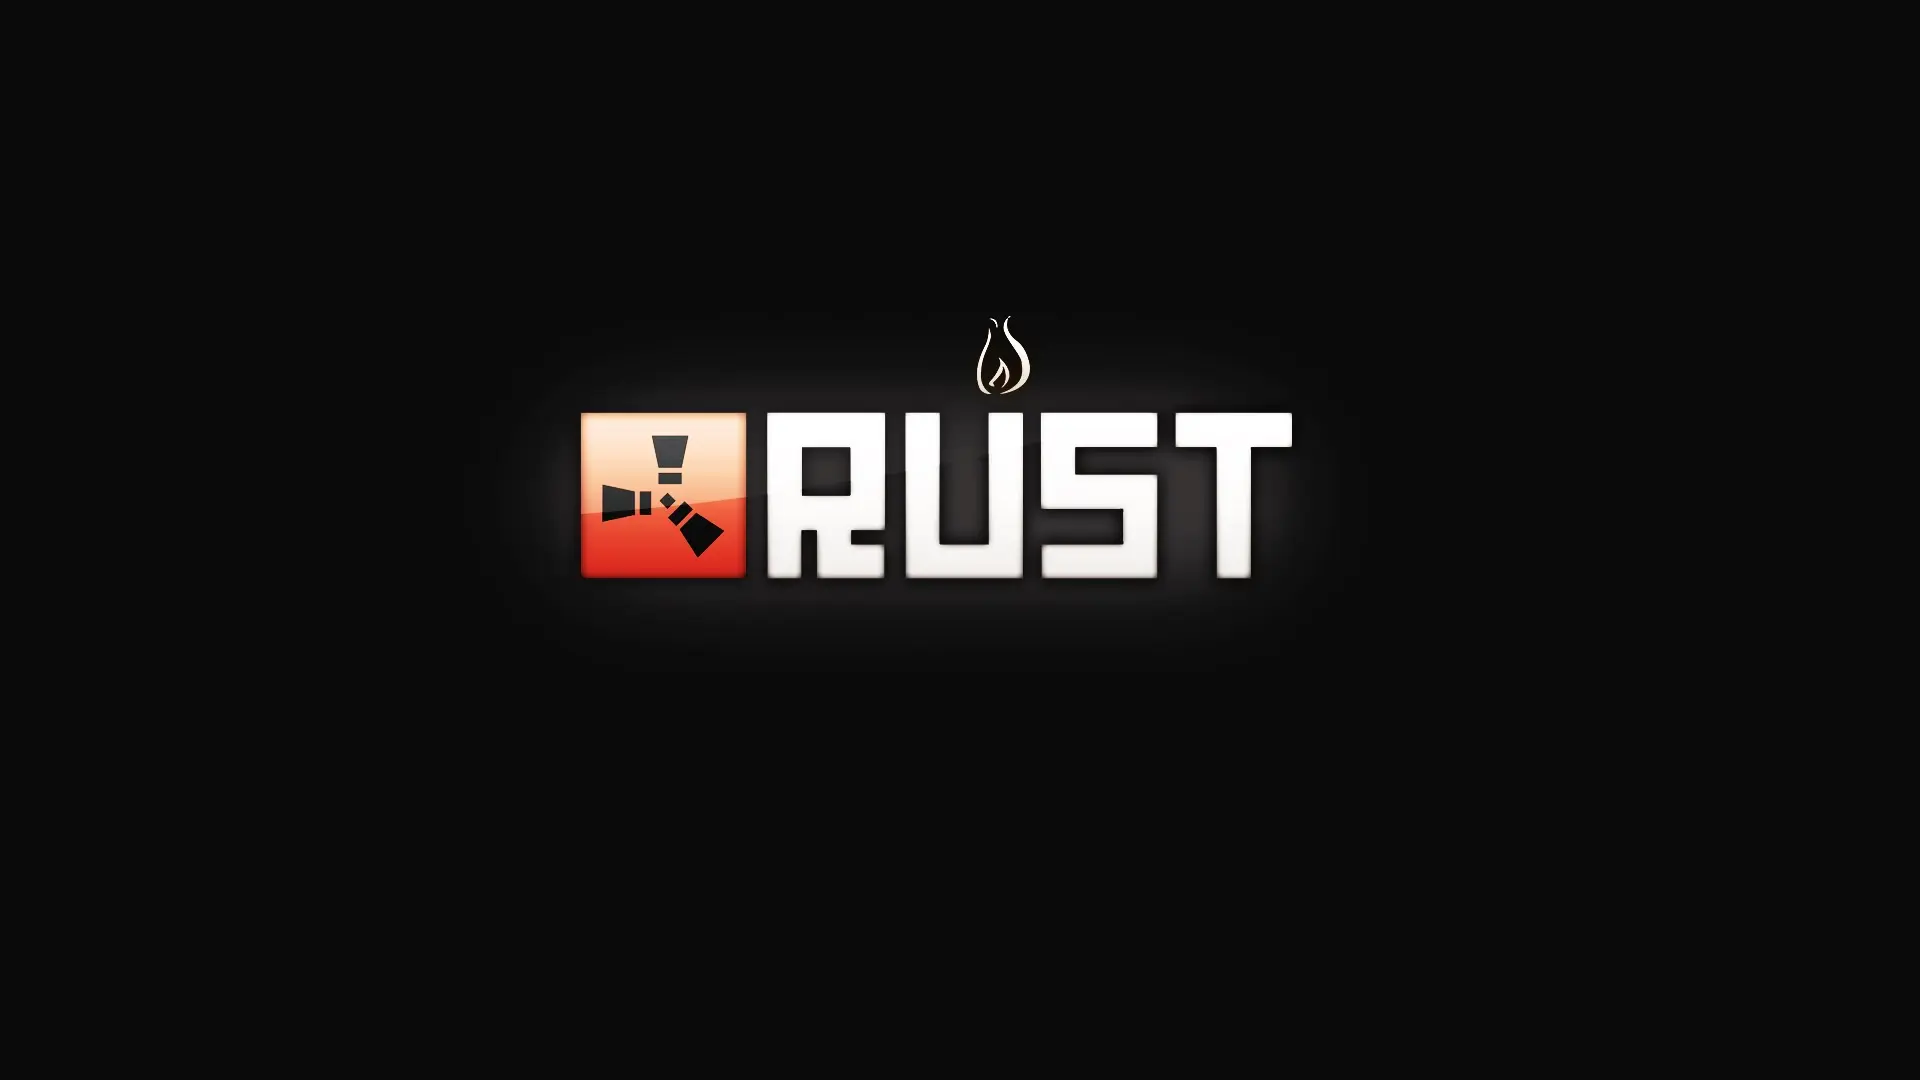 Game Rust wallpaper 6 | Background Image